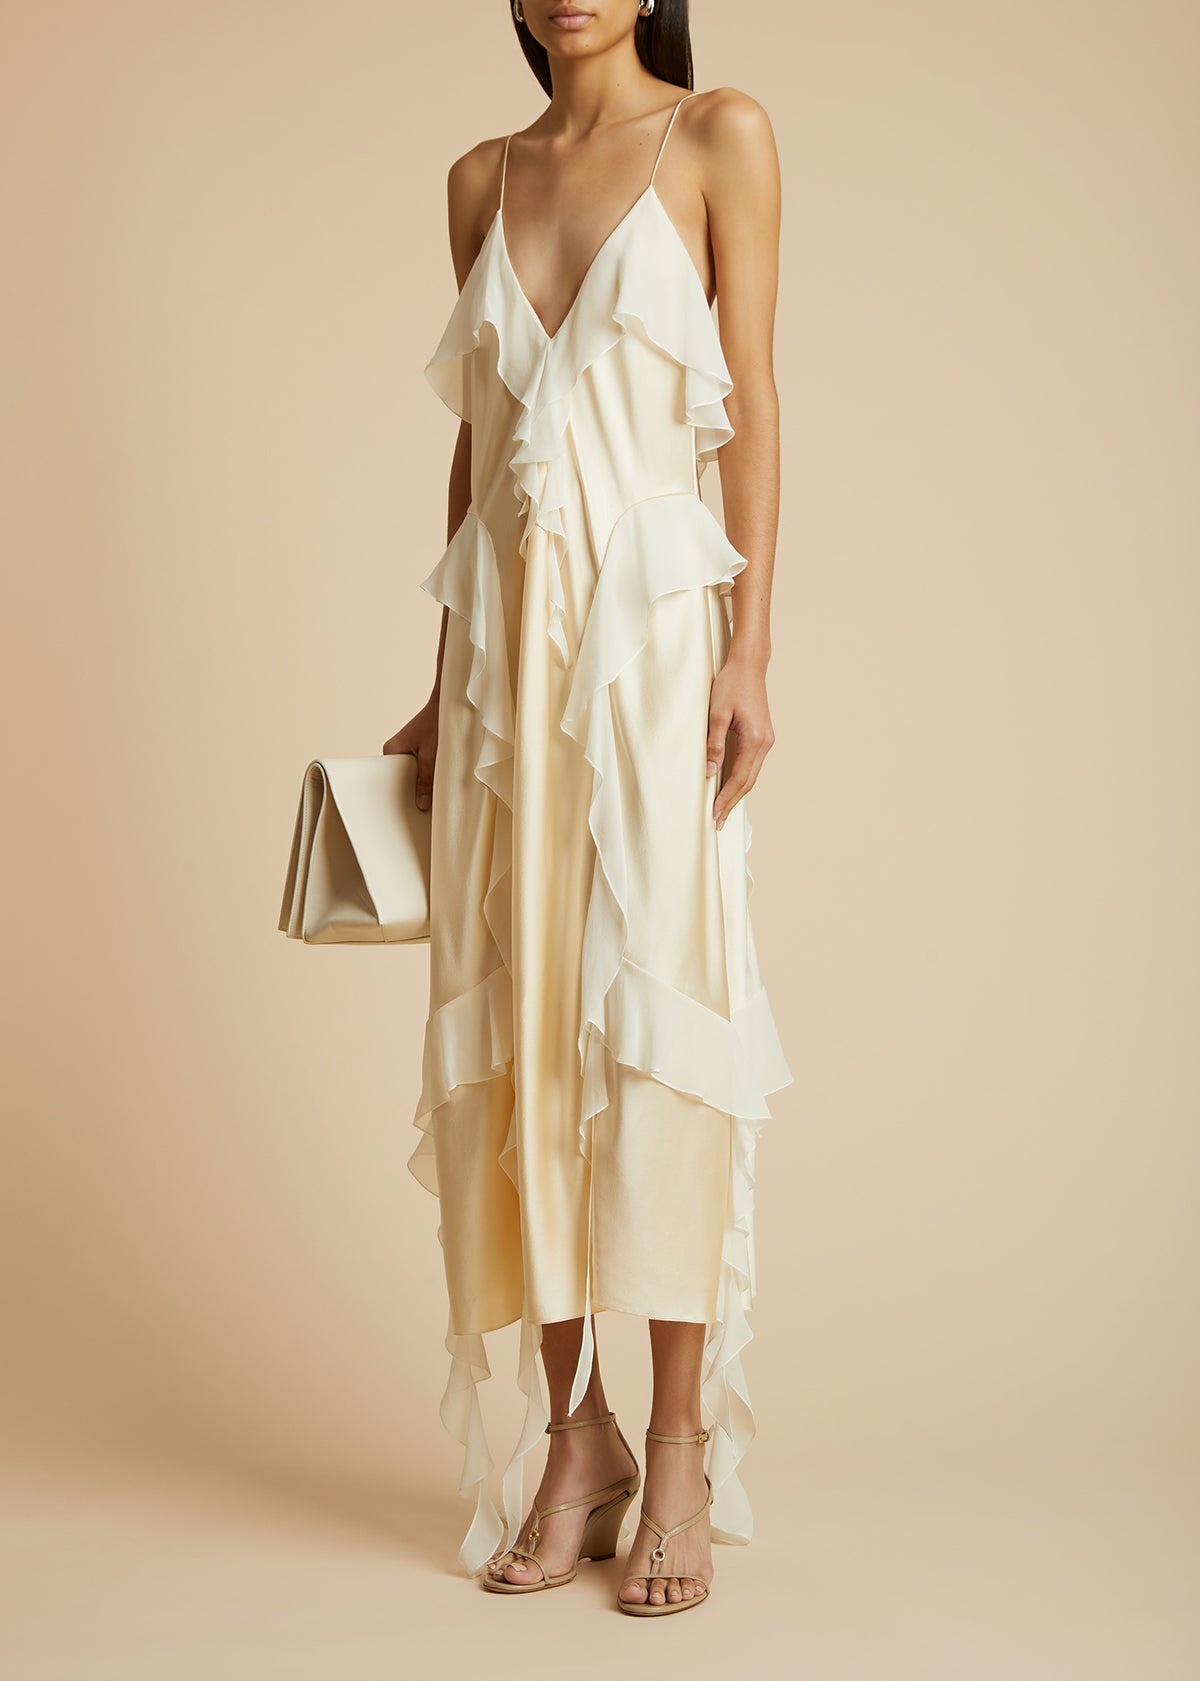 The Hudson Tote in Off-White Leather - 5